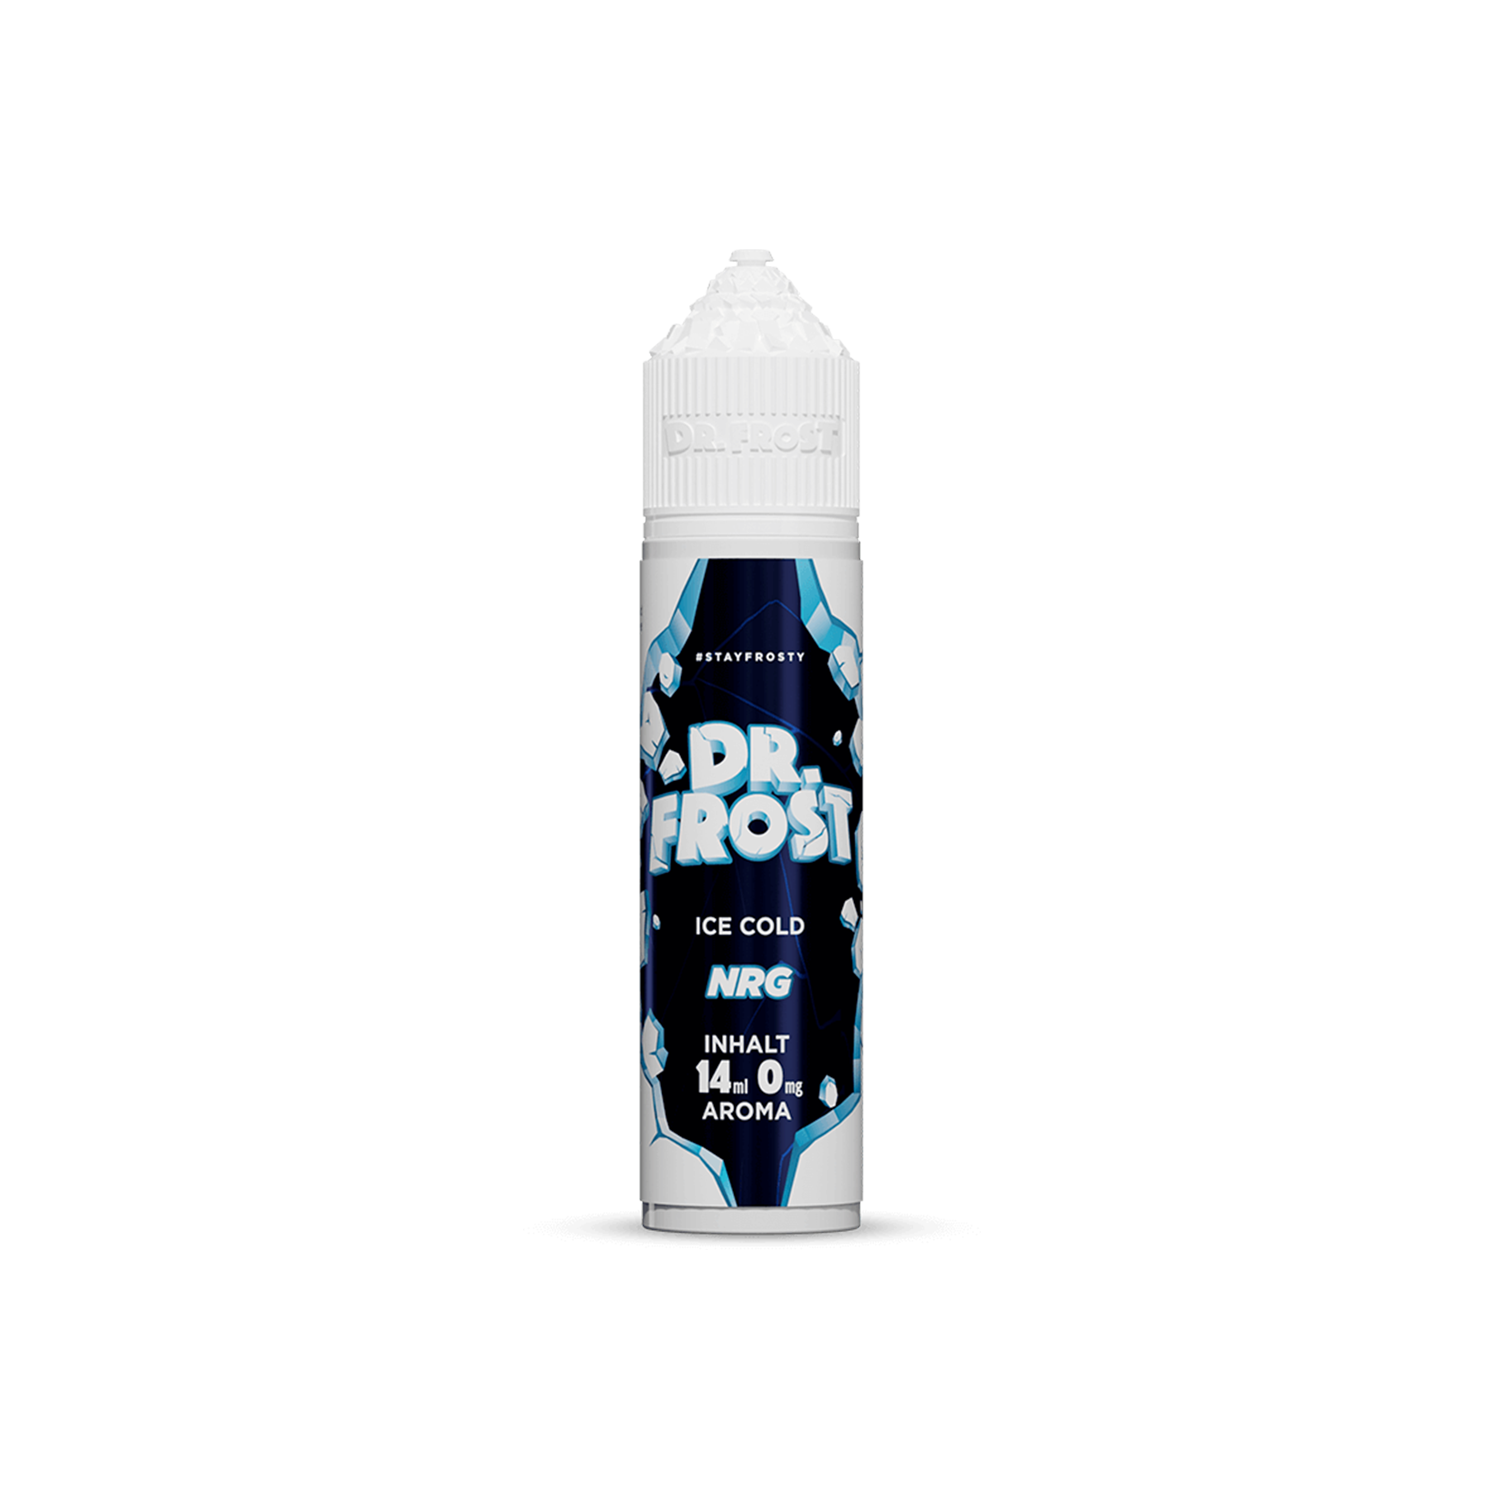 Dr. Frost - Ice Cold - NRG 14 ml Aroma